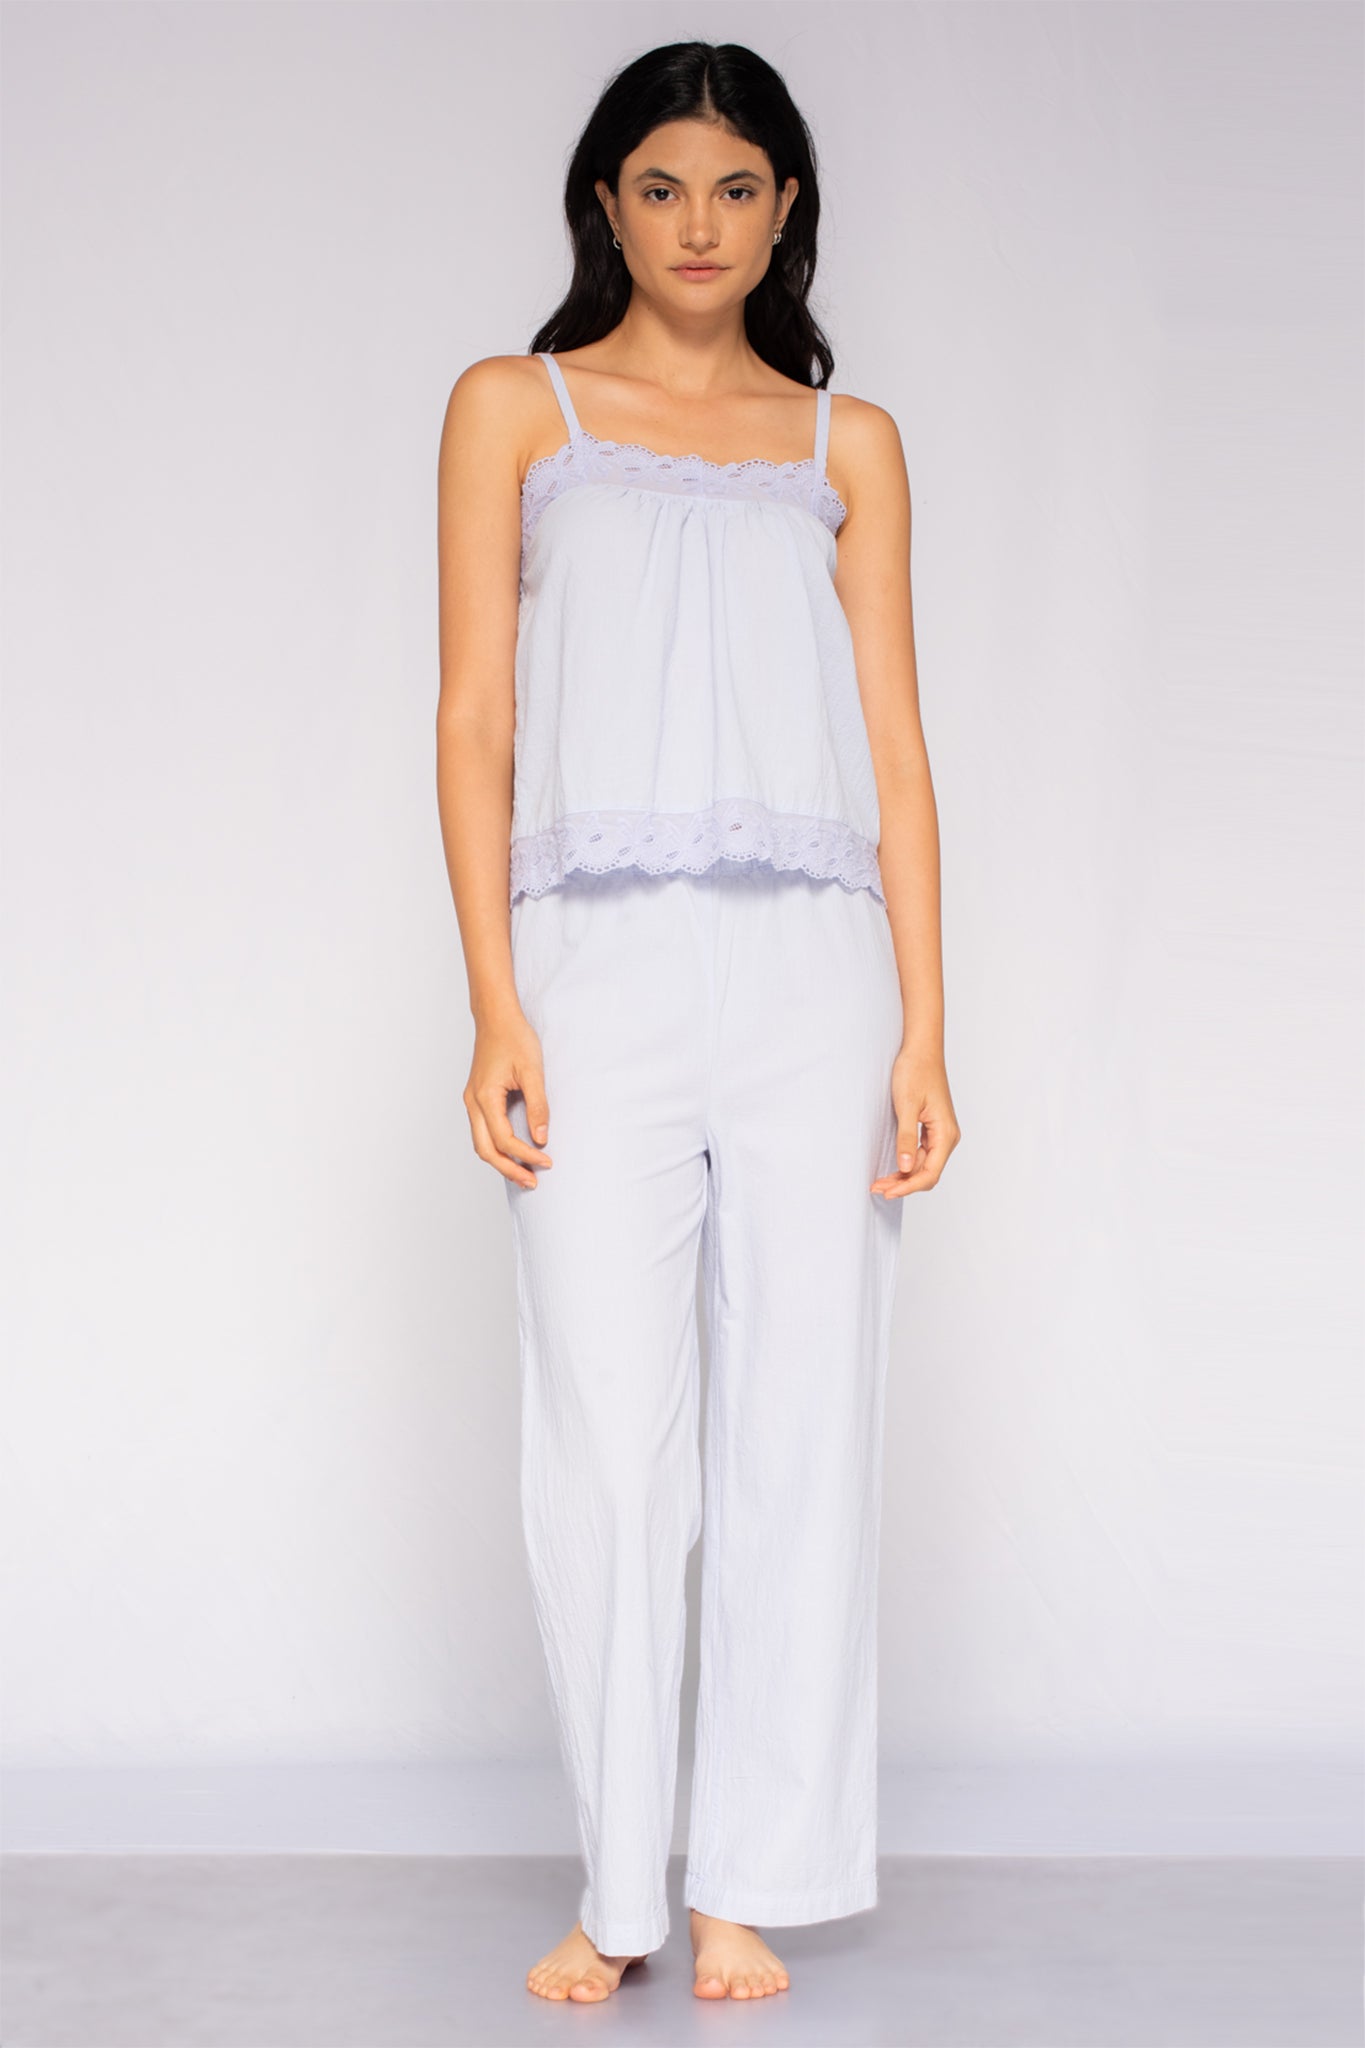 Lounge Pants - Womens - Cotton Relaxed Fit Pants